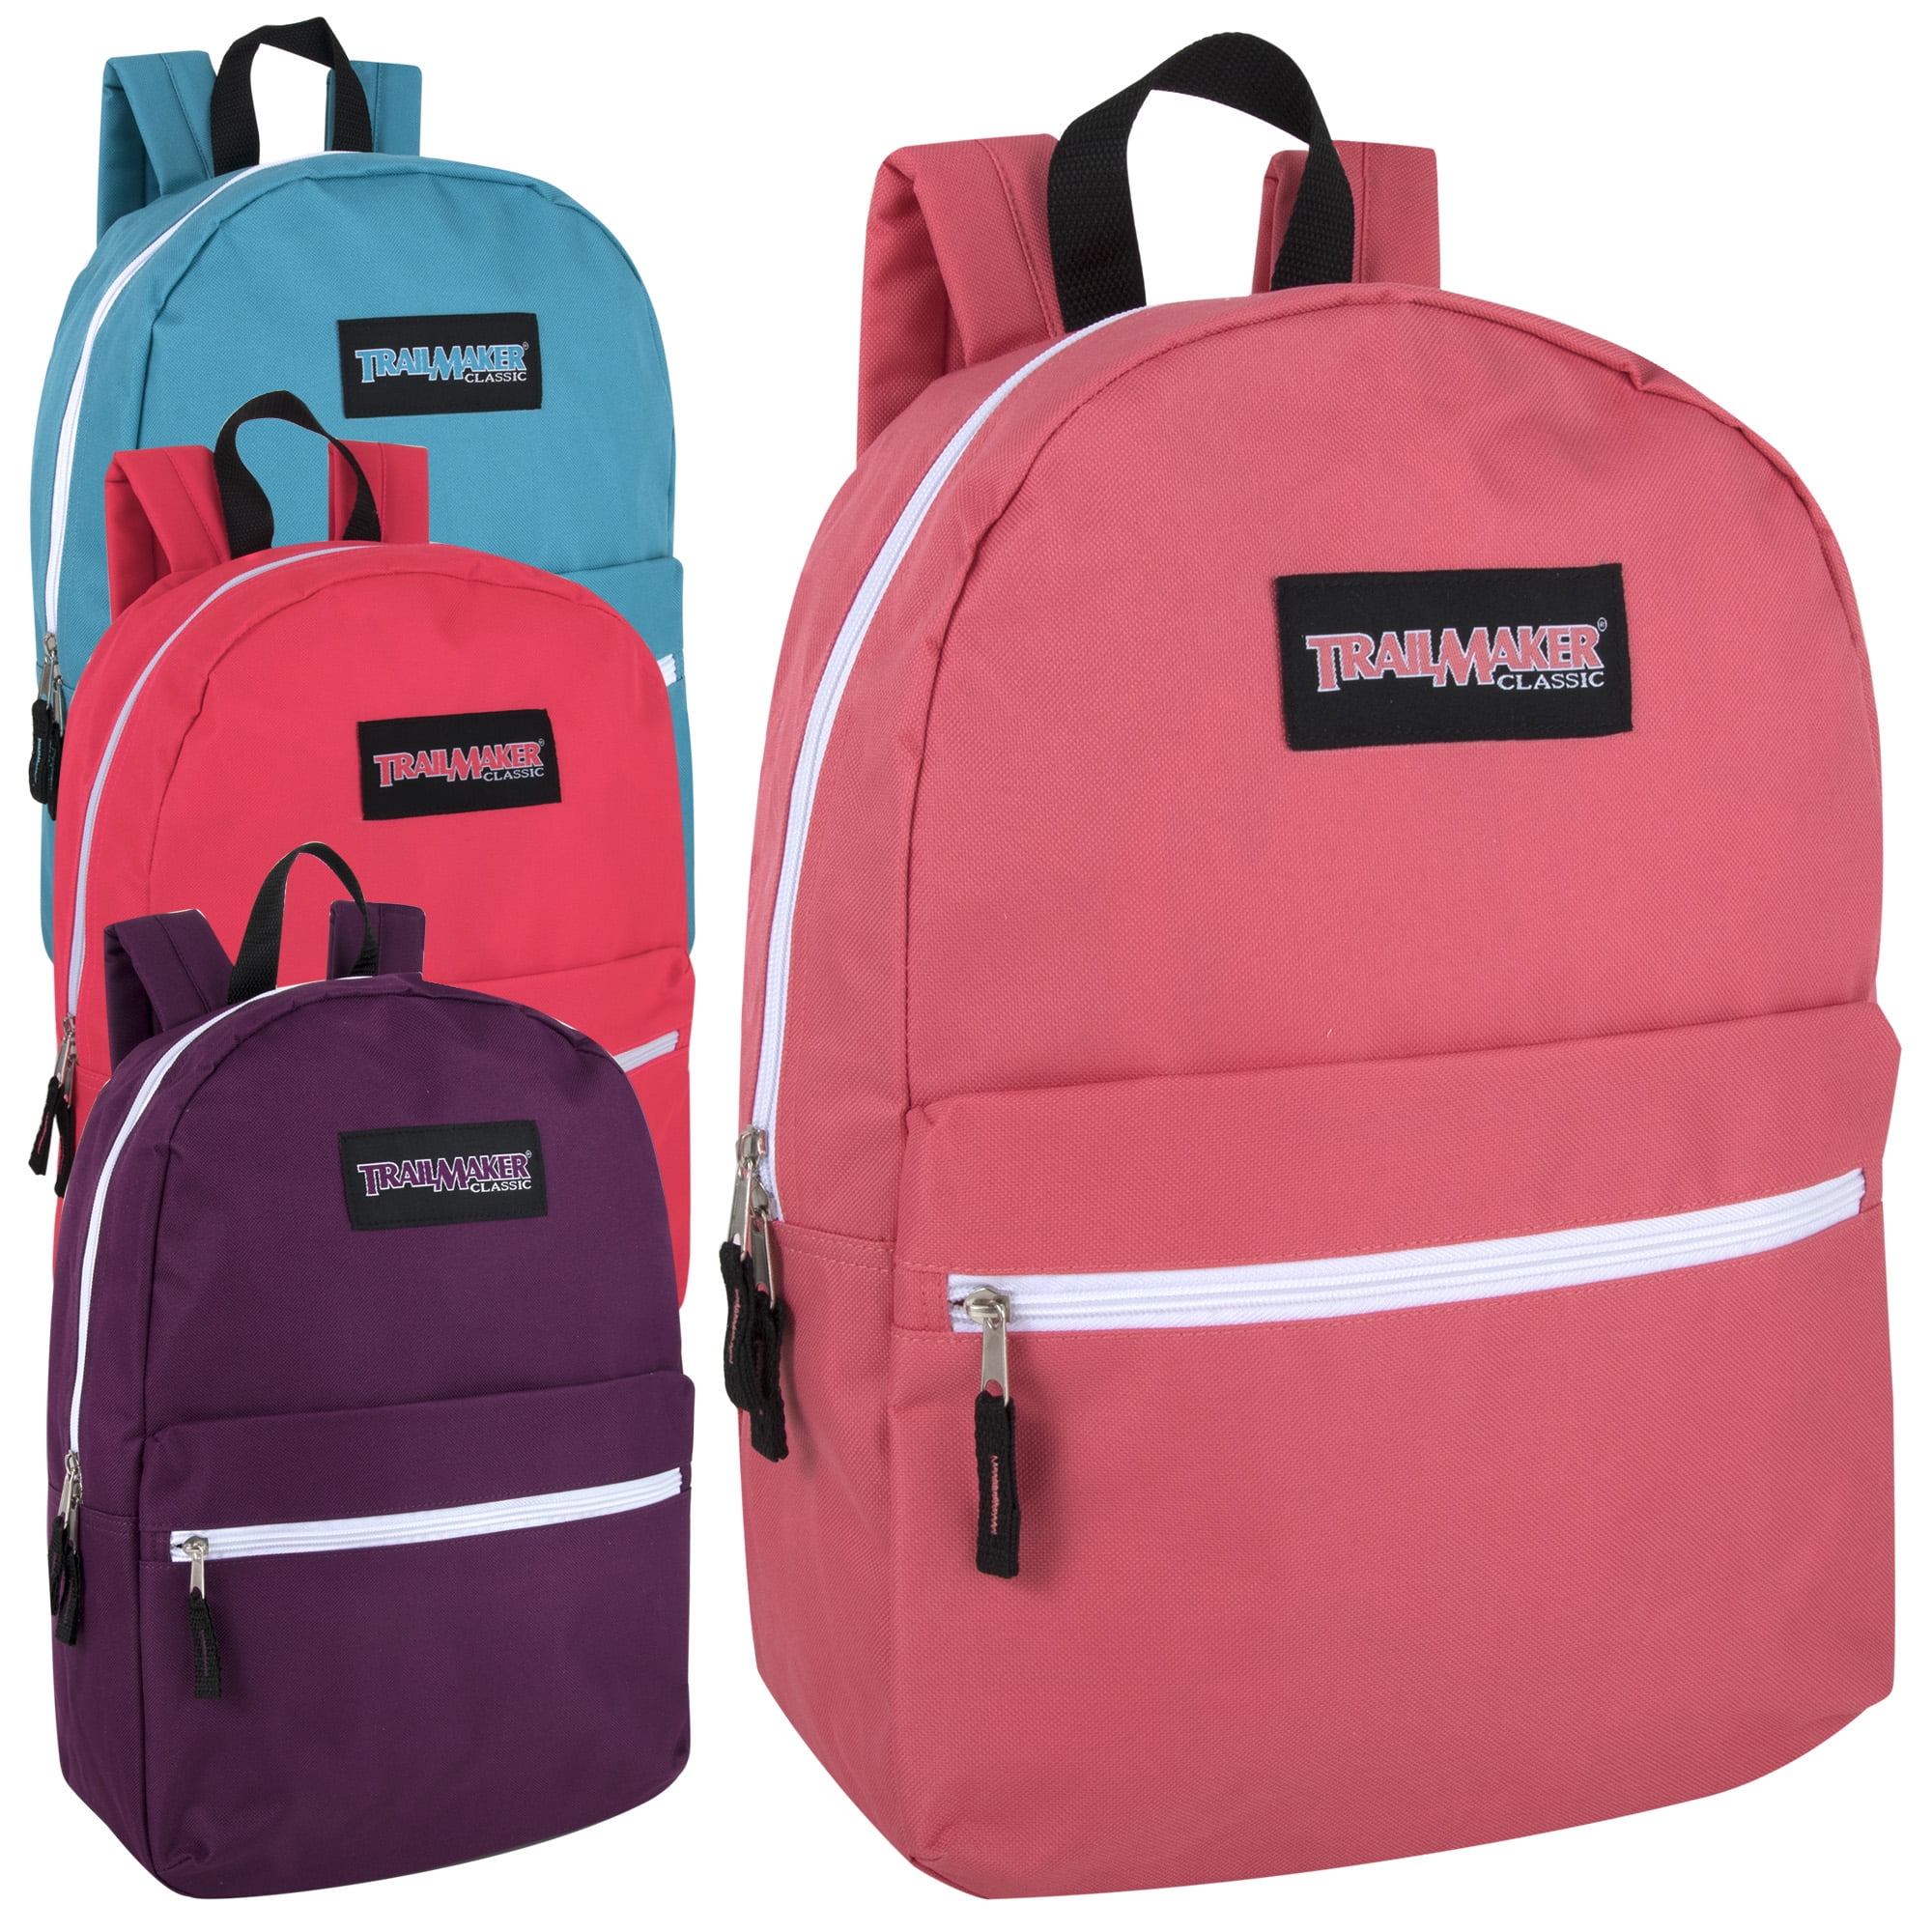 17 Inch Wholesale Backpacks In 3 Assorted Colors Bulk Case of 24 Classic Bookbags